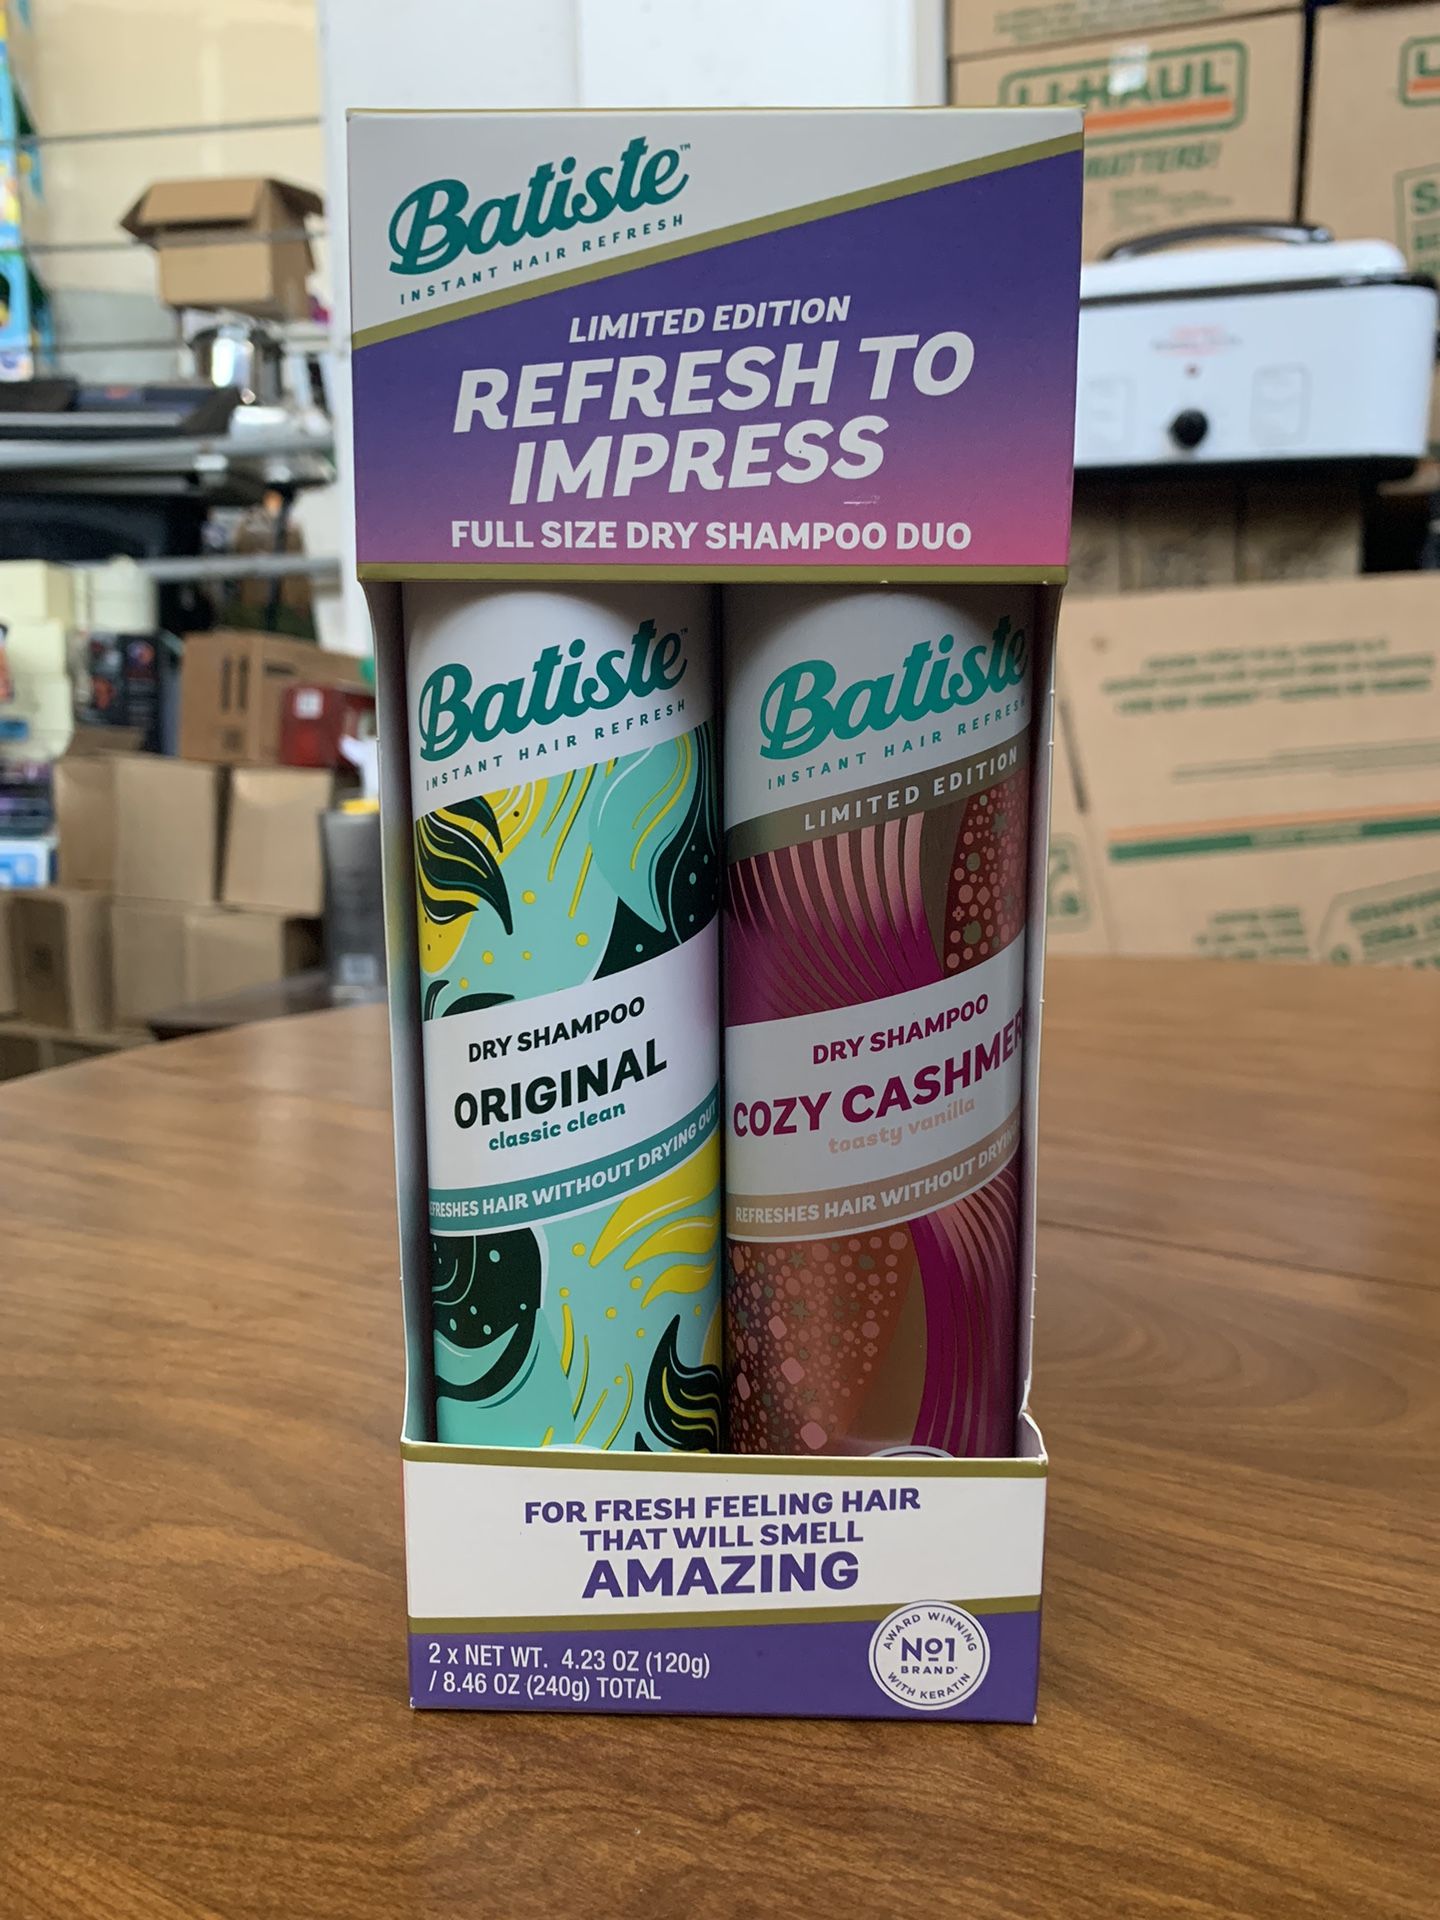 Duo Pack Batiste Dry Shampoo-Original Classic Clean & Cozy Cashmere Toasted